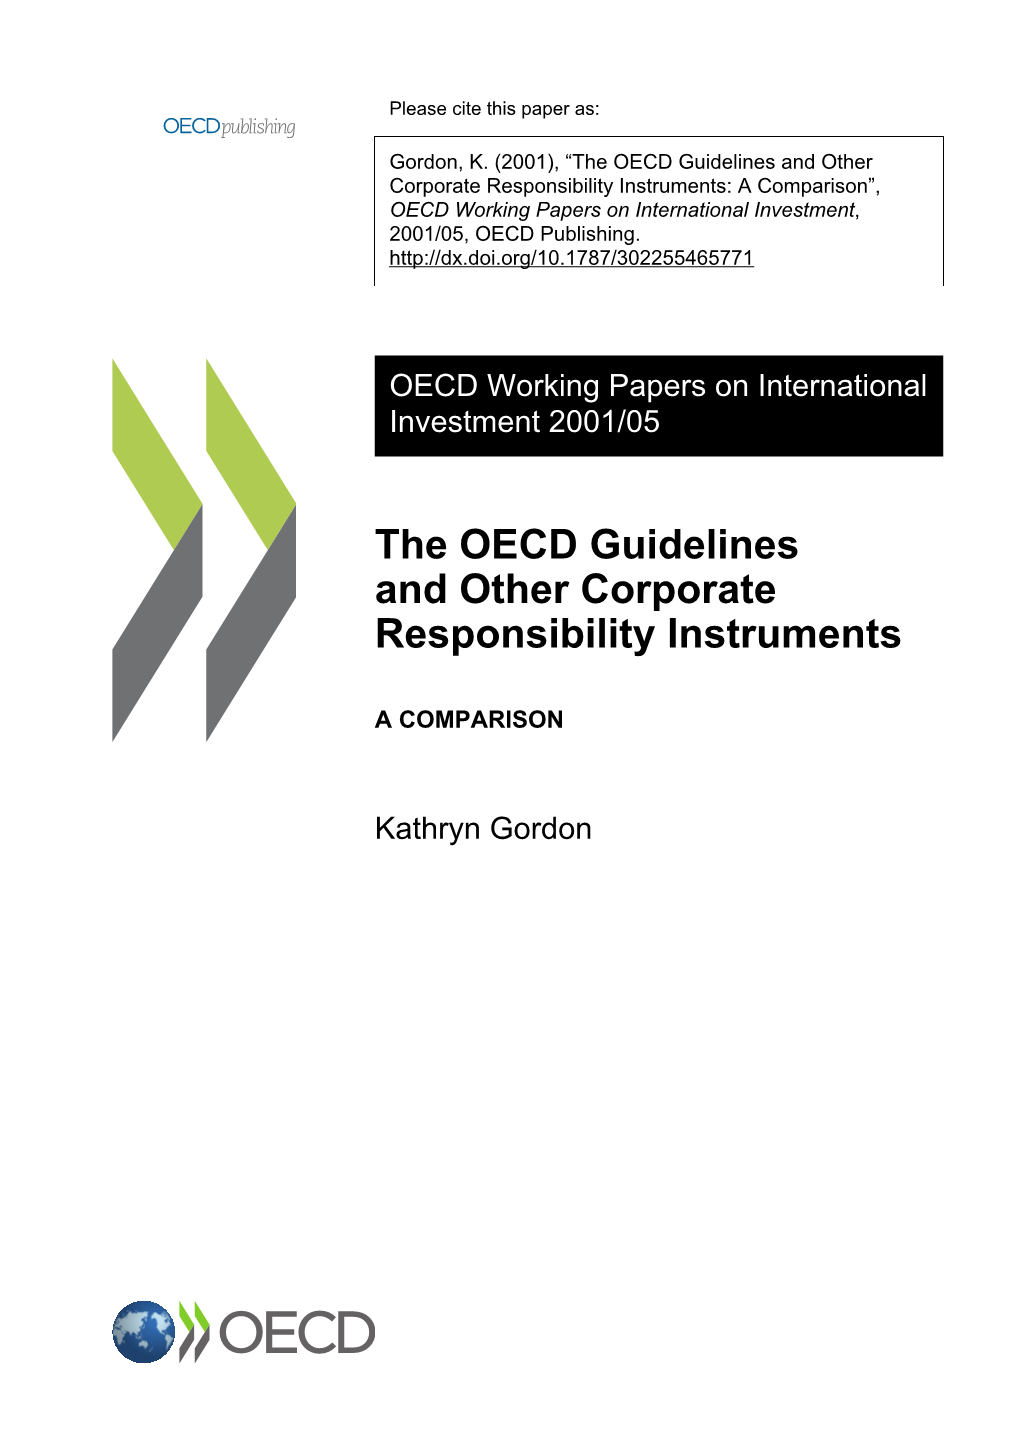 The OECD Guidelines and Other Corporate Responsibility Instruments: a Comparison”, OECD Working Papers on International Investment, 2001/05, OECD Publishing